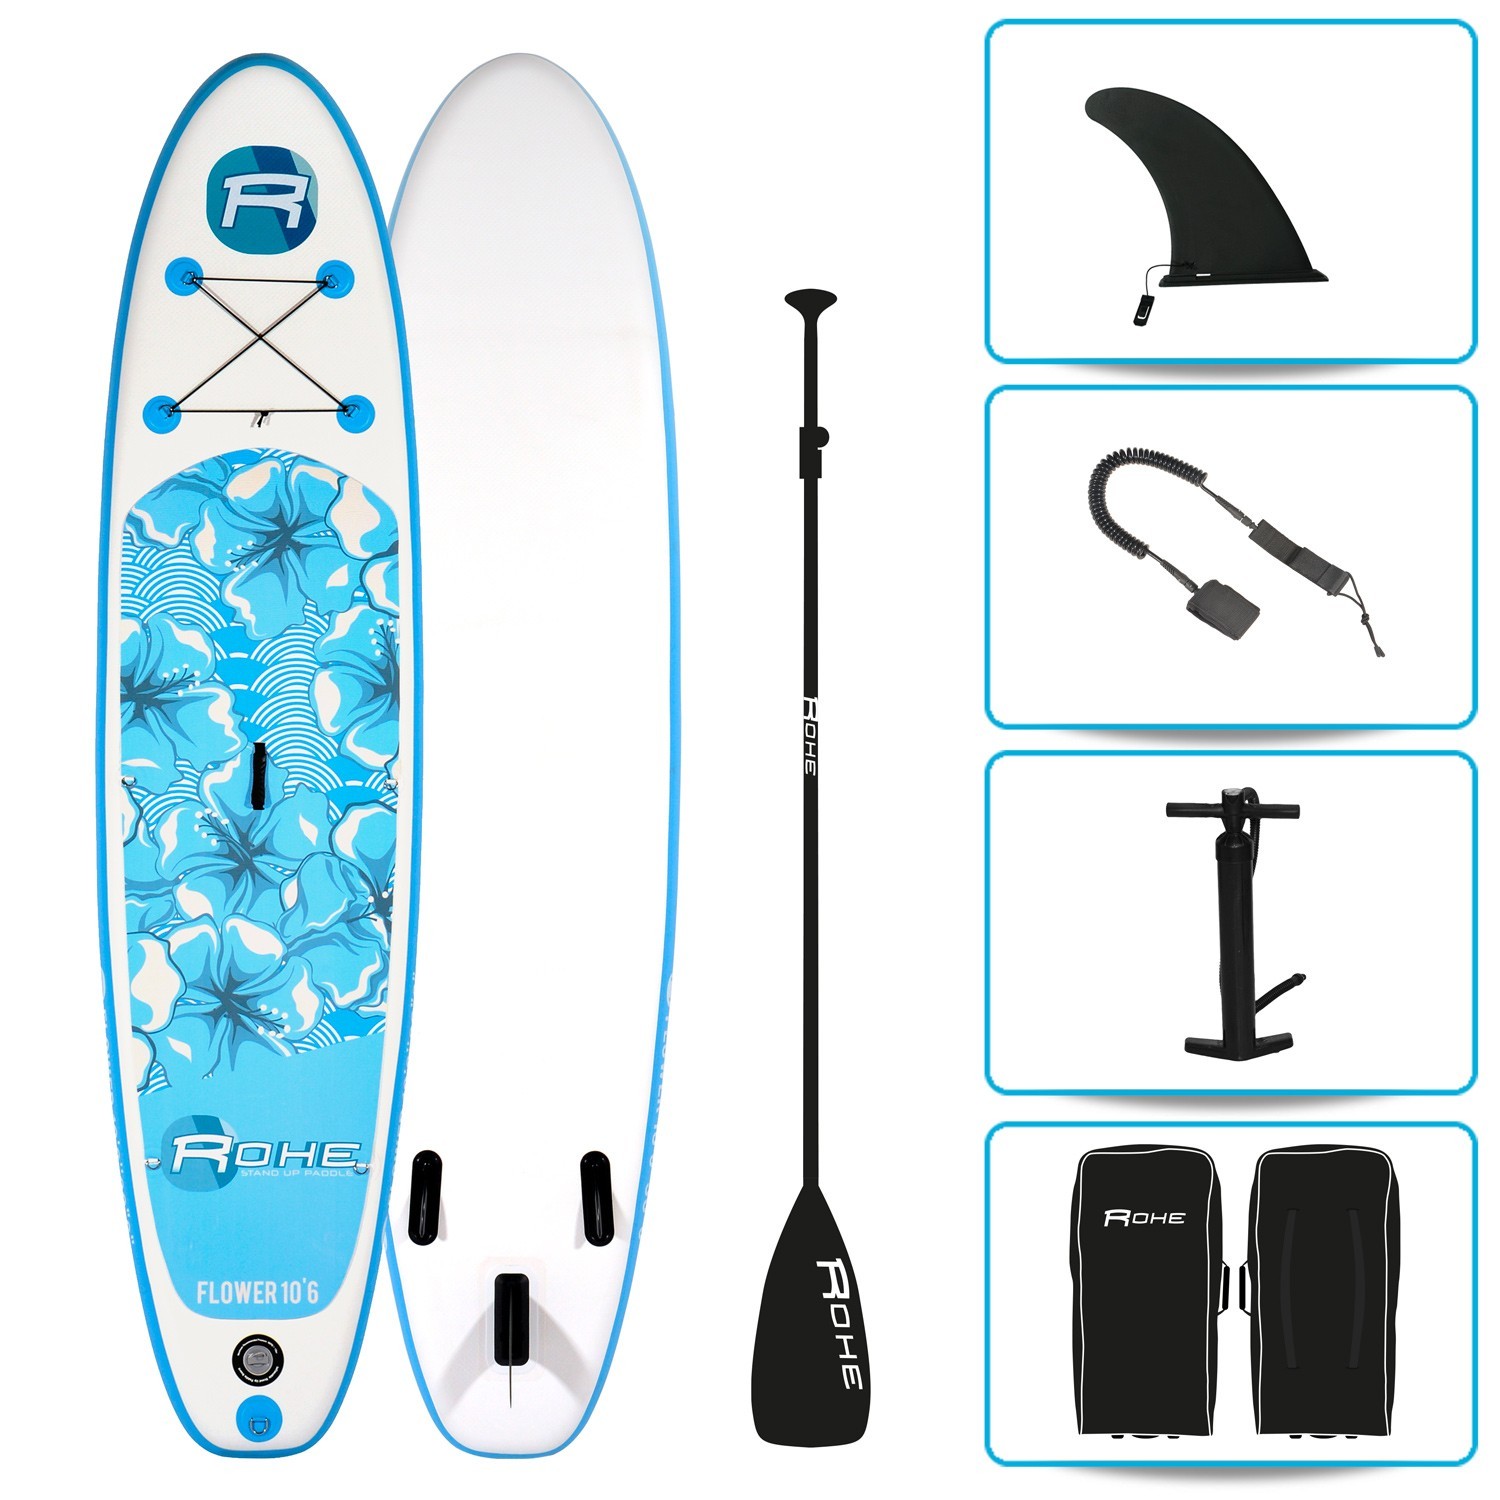 Paddle Hinchable Flower 10'6' + Accesorios 320 X 76 X 15 Cm - Paddle Surf  MKP